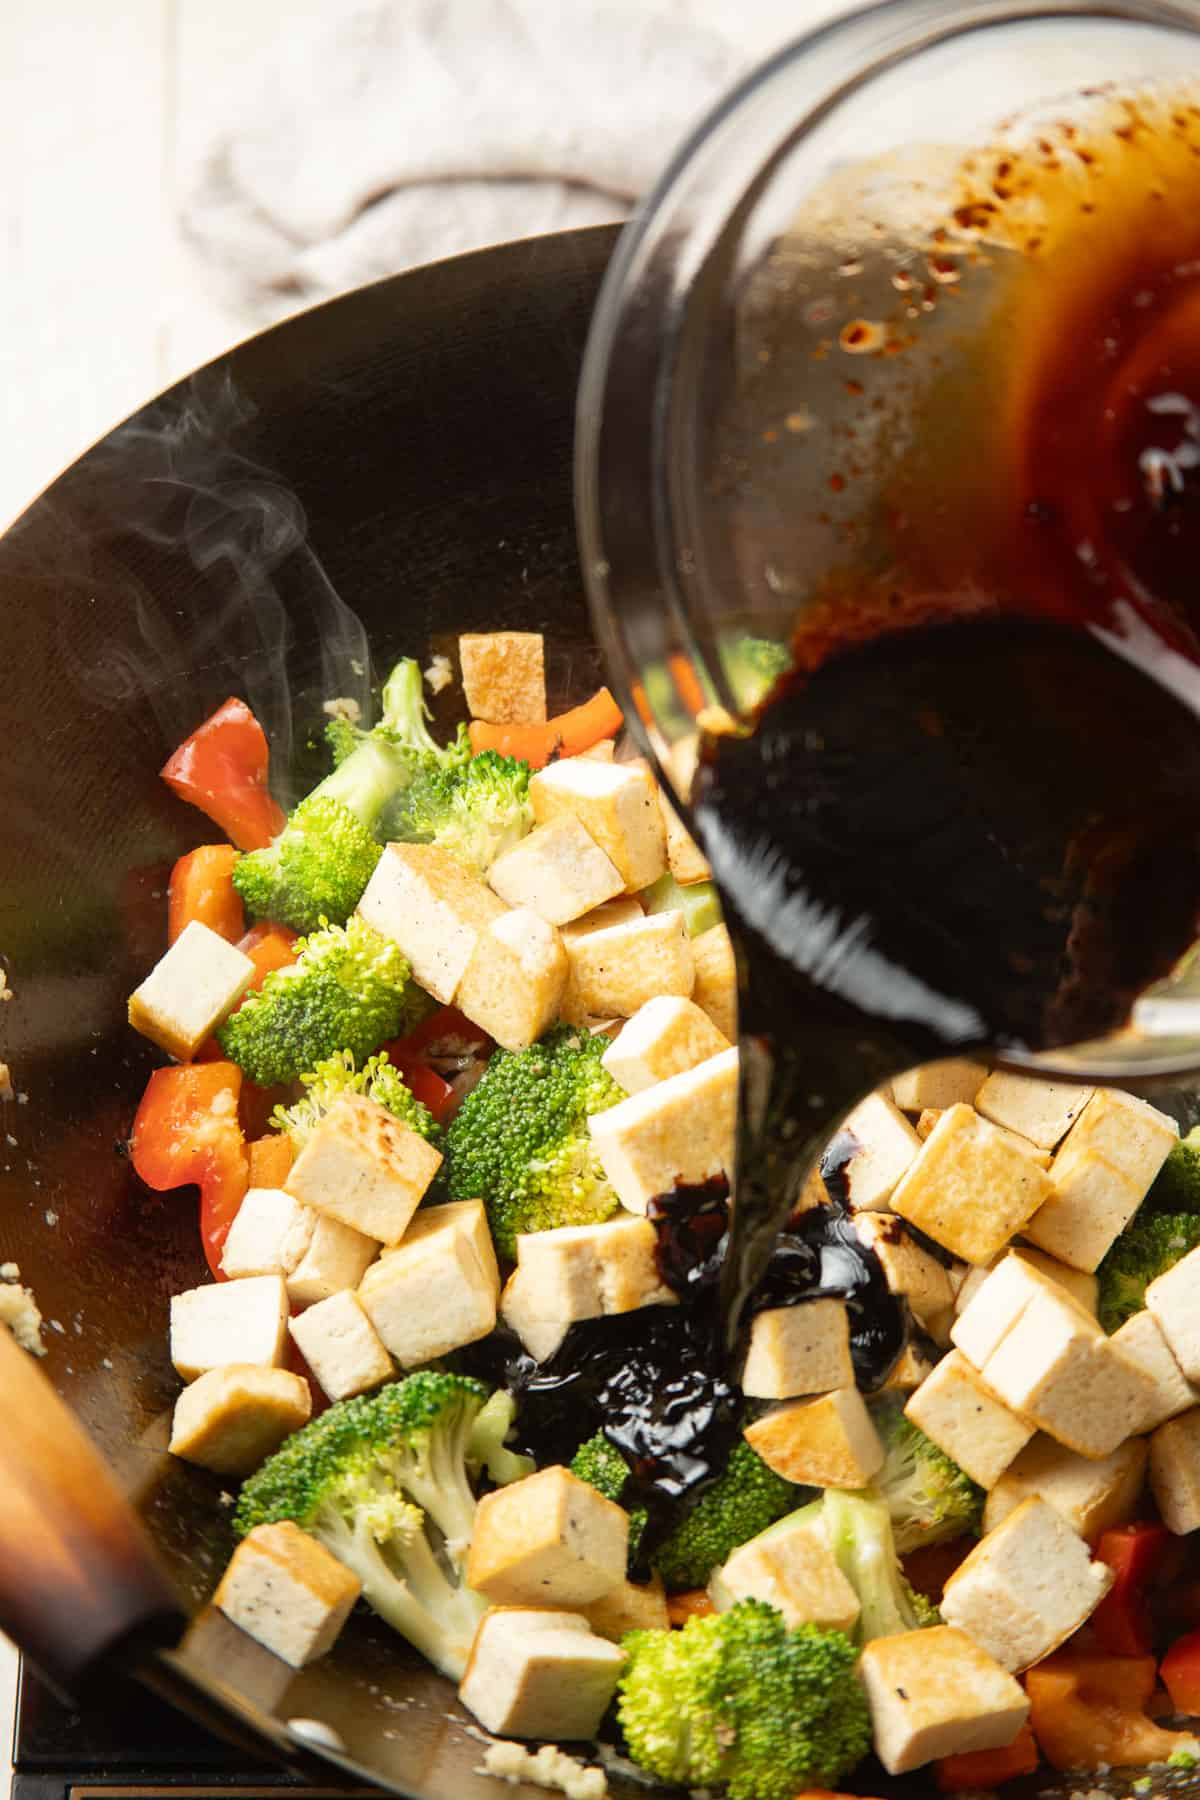 Sauce being poured into a wok filled with tofu and vegetables.